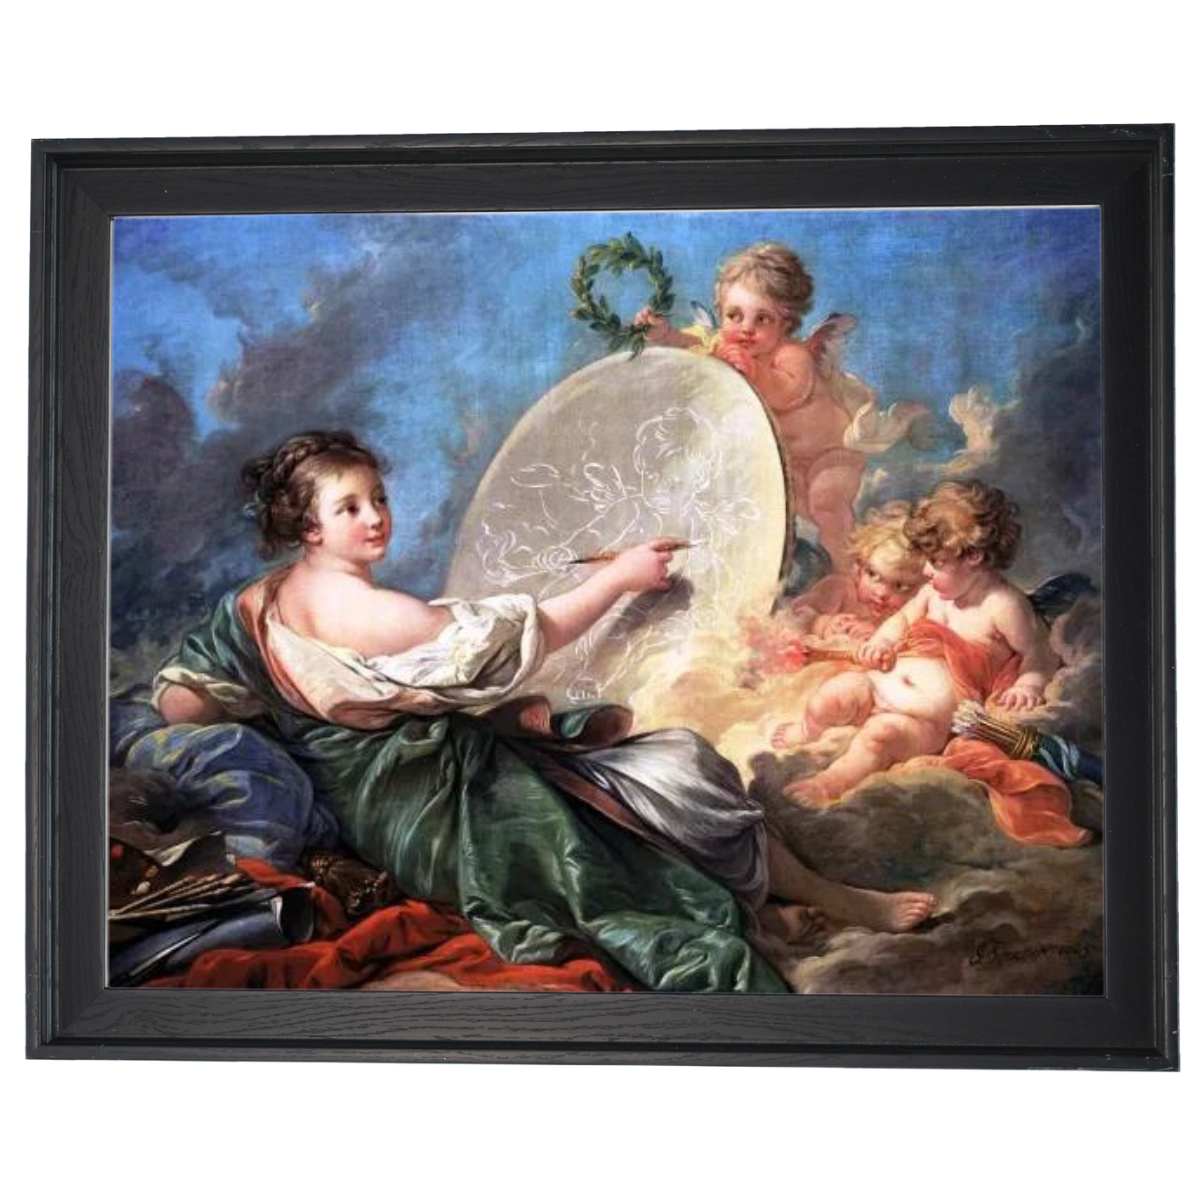 Allegory Of Painting - Vintage Wall Art Print For Living Room Decor 